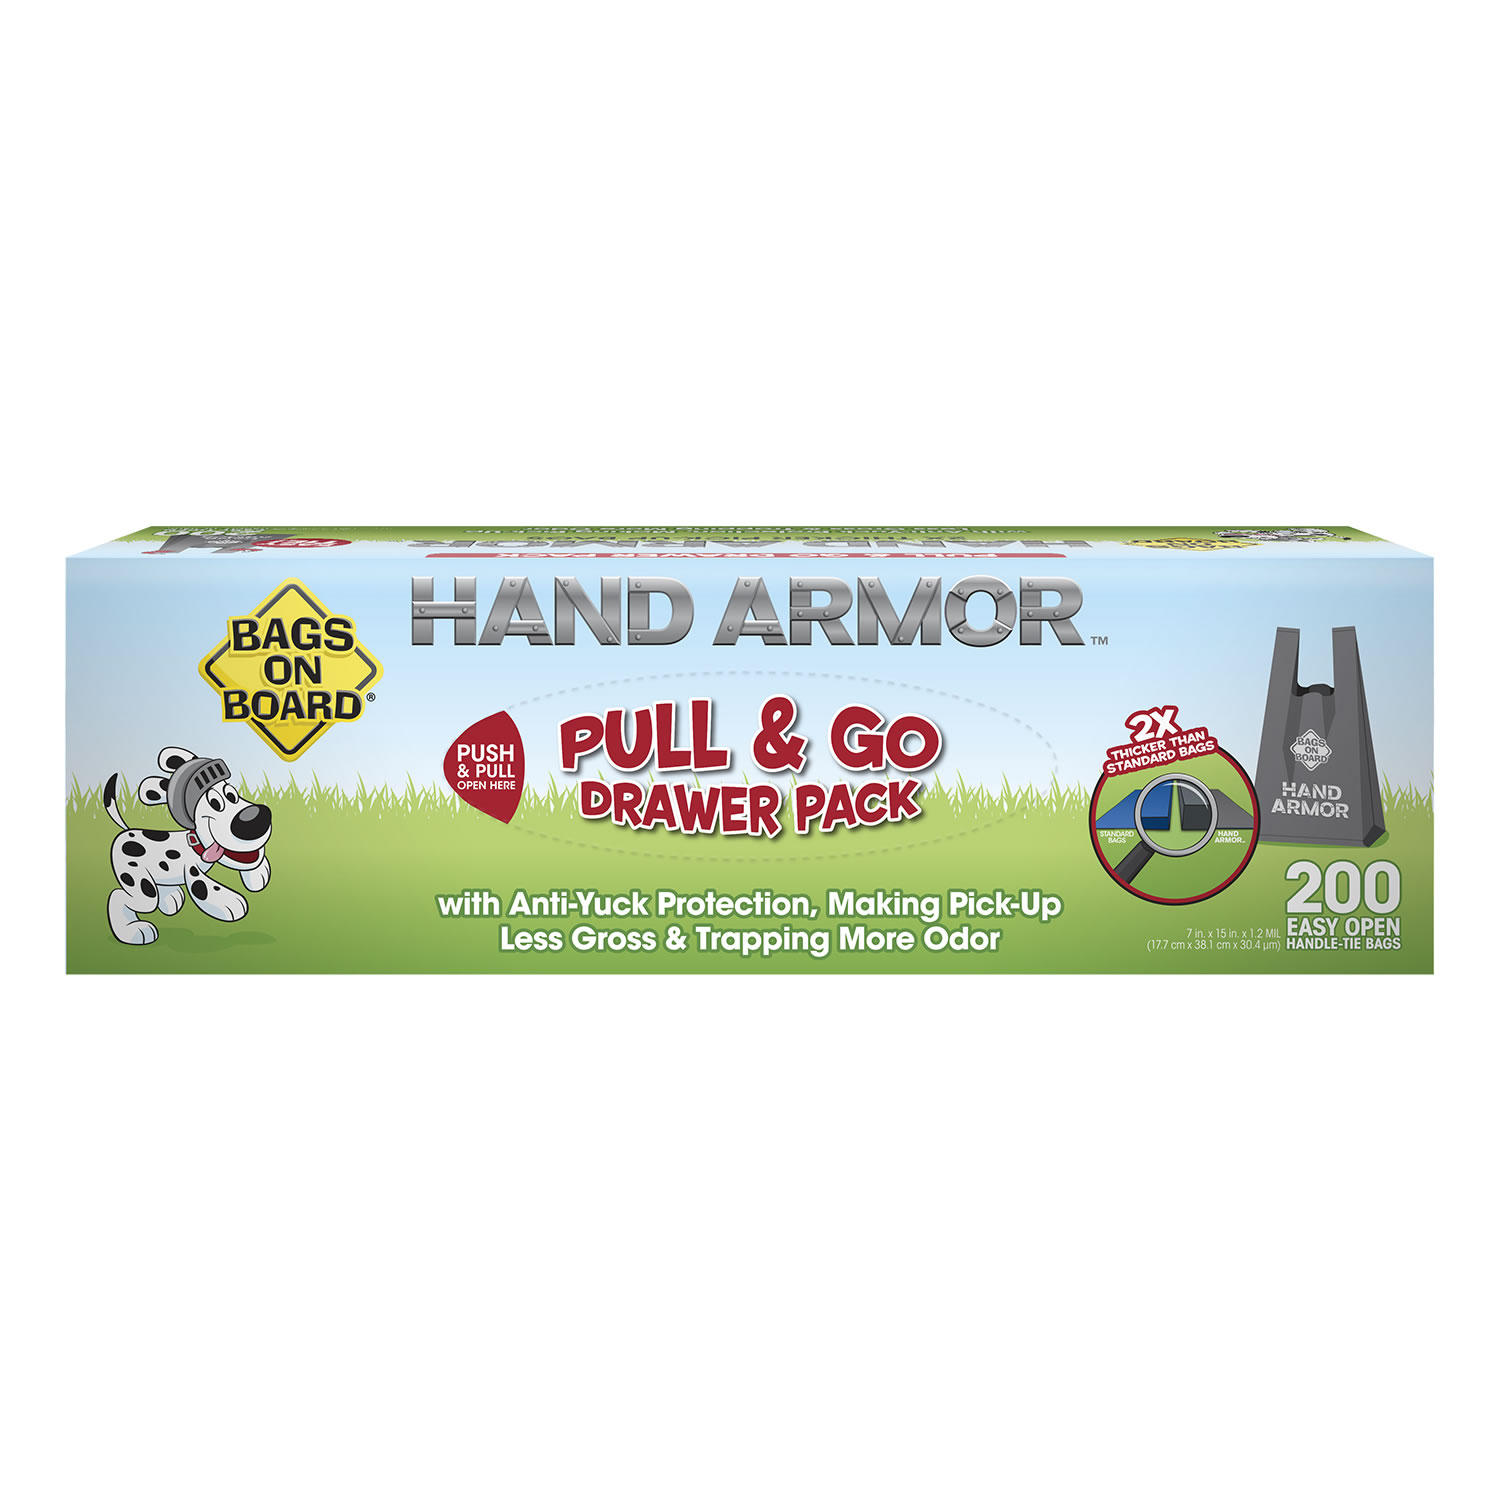 BAGS ON BOARD HAND ARMOUR 2X EXTRA THICK DRAWER PACK  200 BAGS 200 BAG